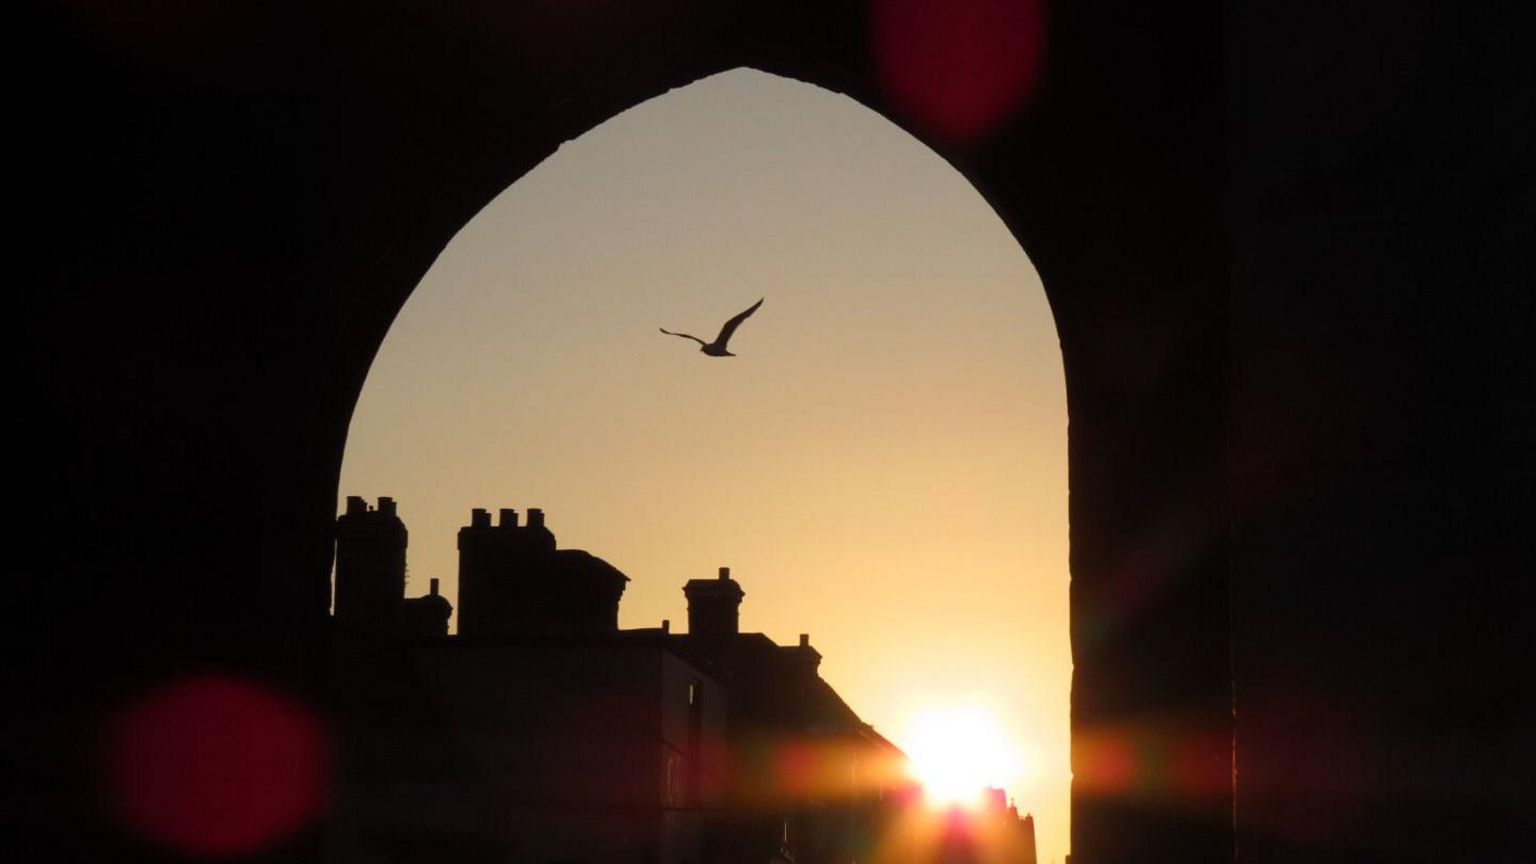 A seagull in an archway with the sun coming through in the background 